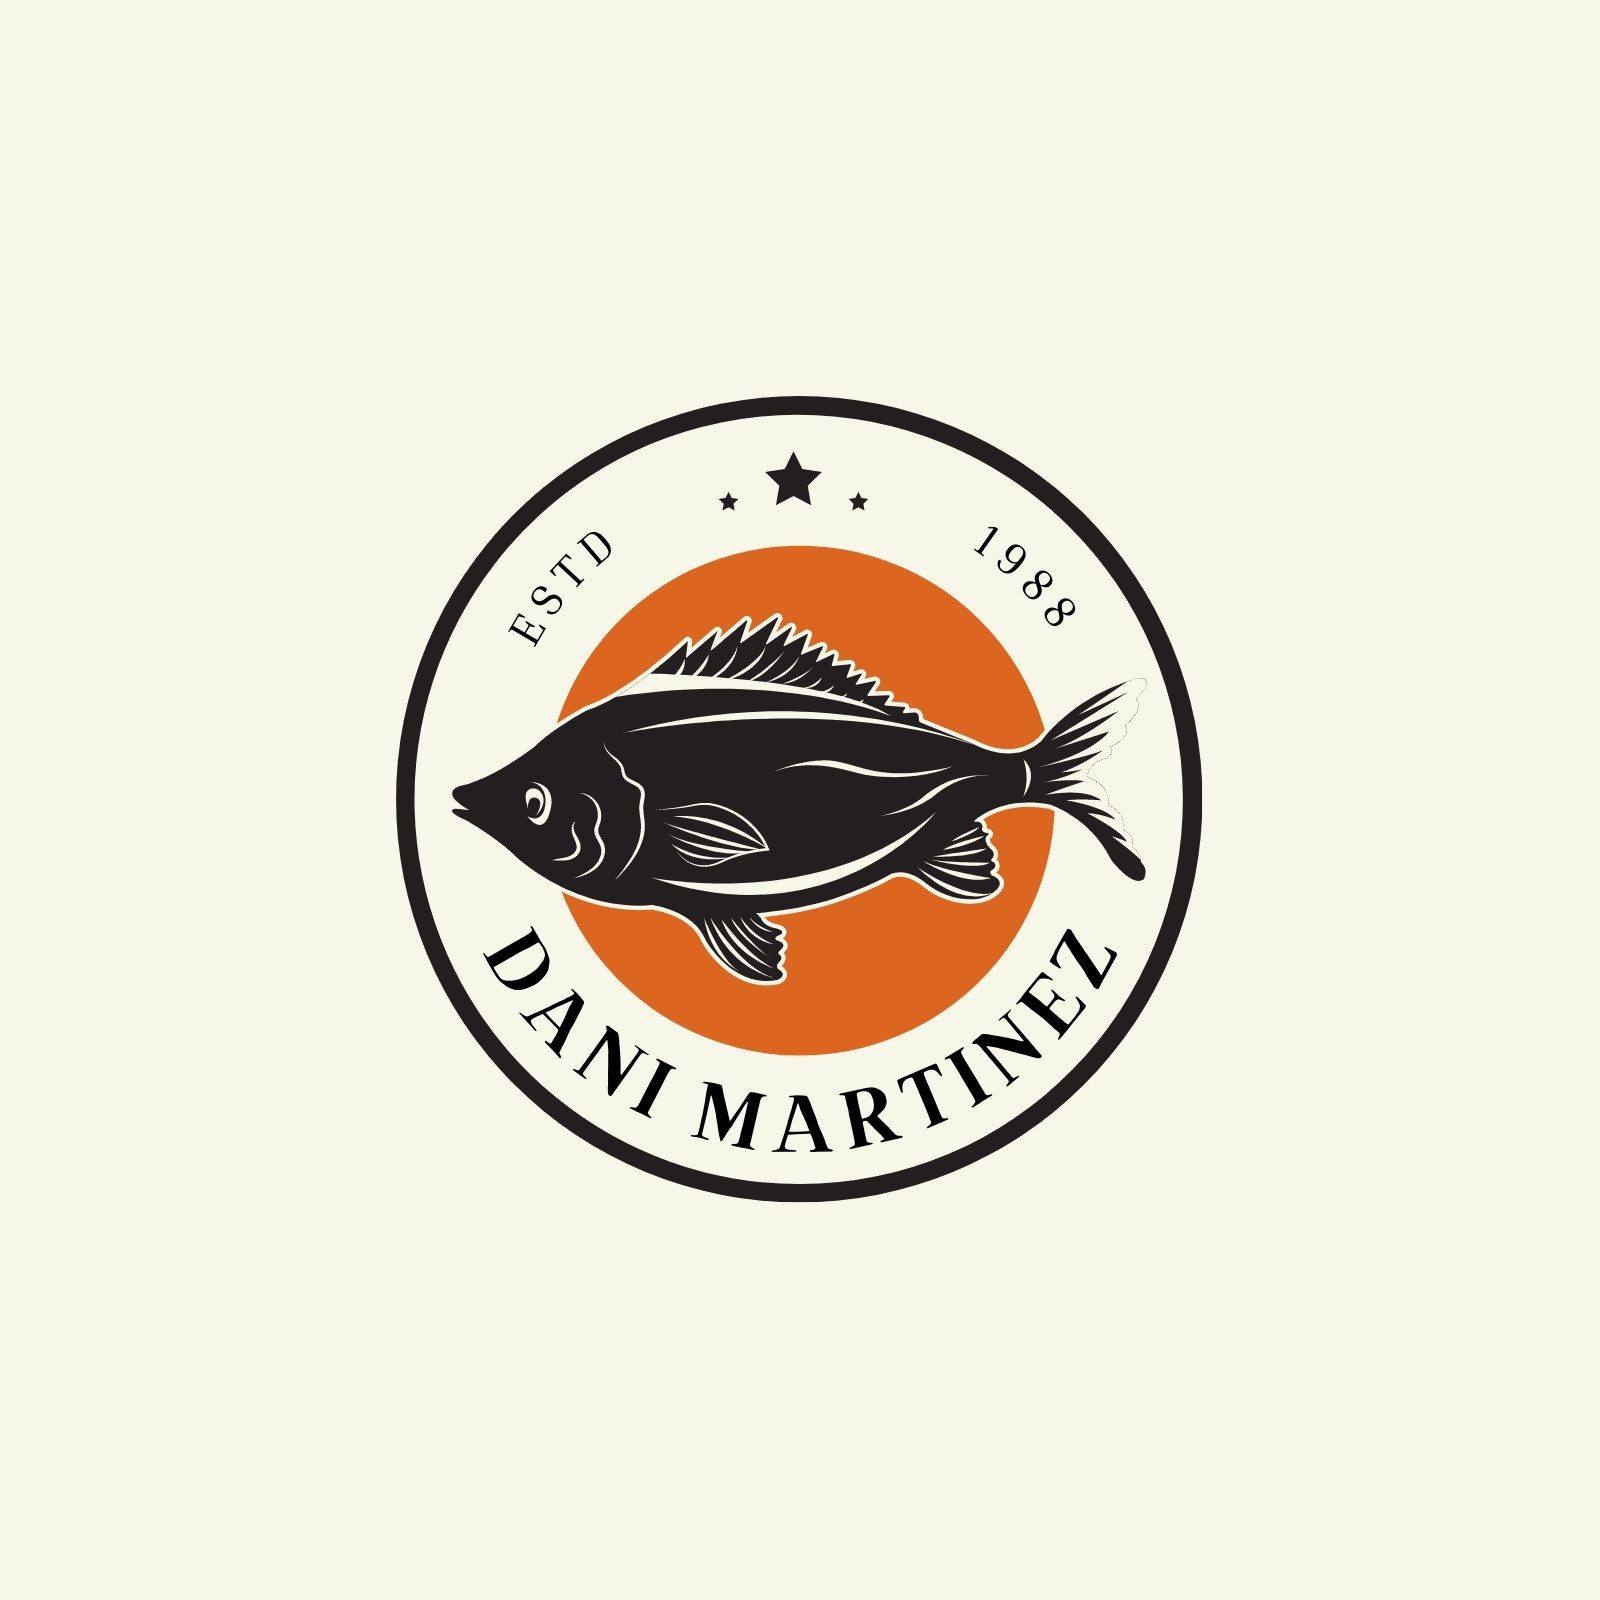 Free and customizable fish templates